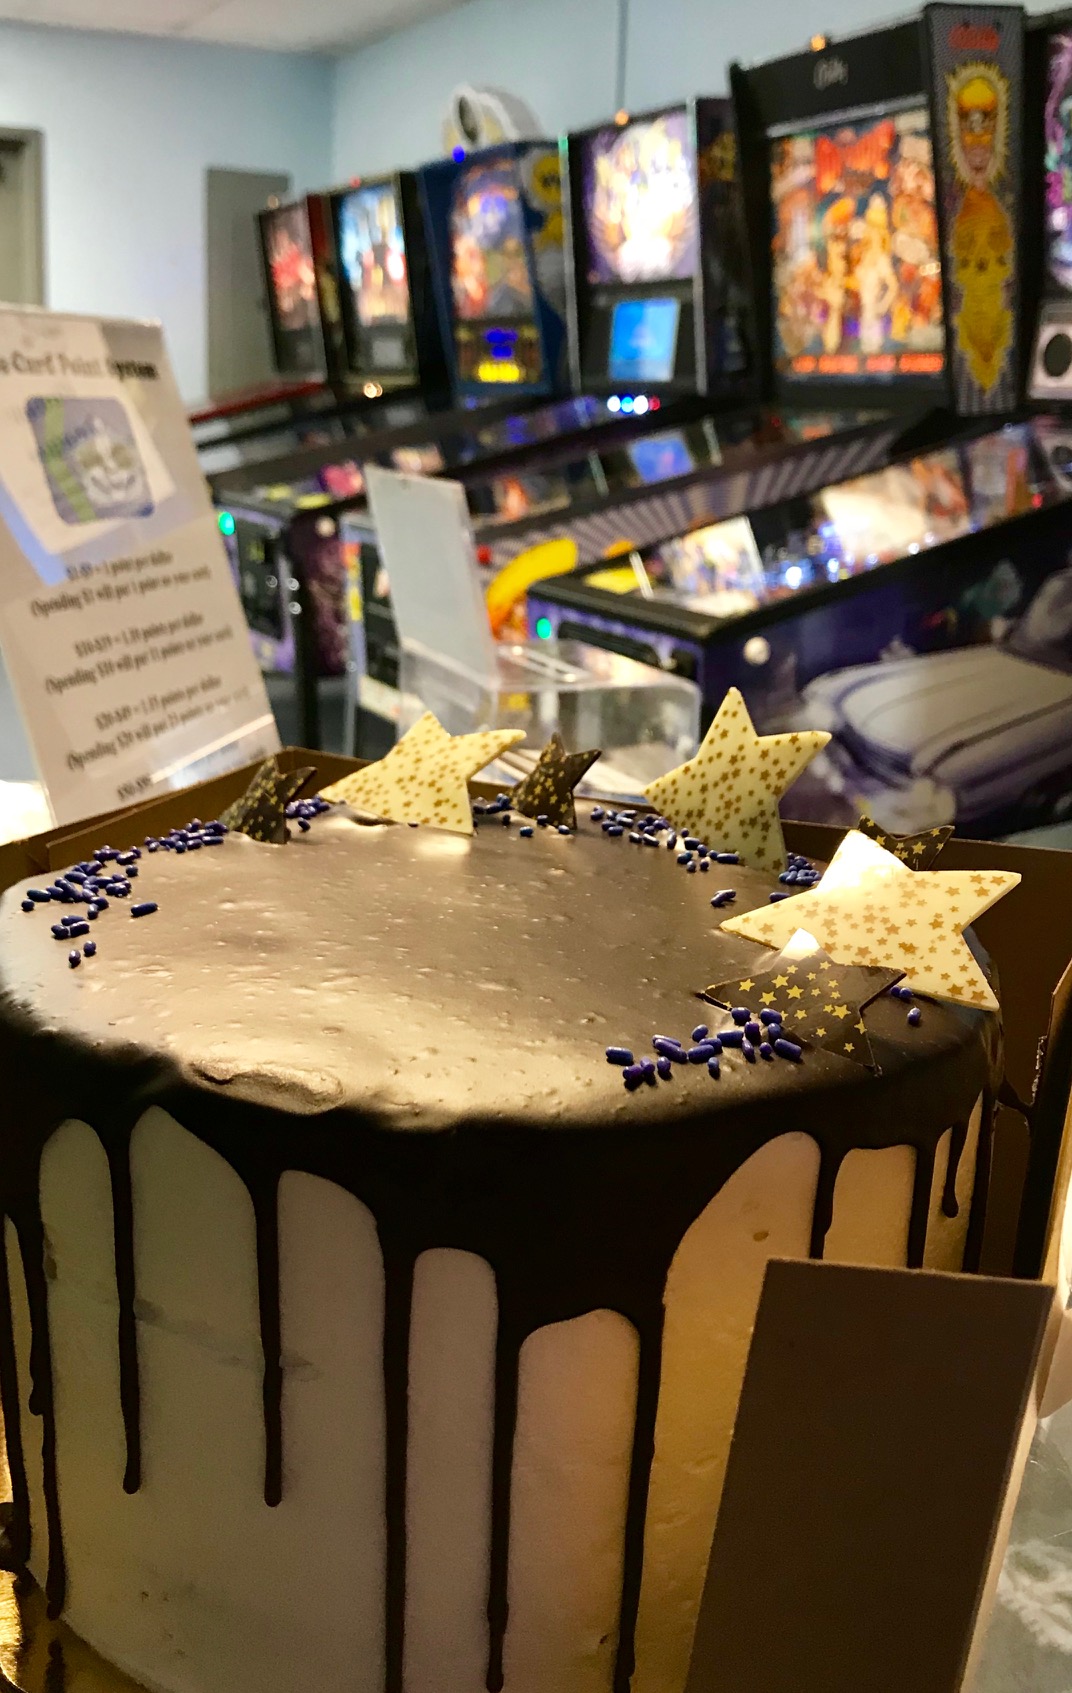 Party cake centered in frame before pinball machines in background.